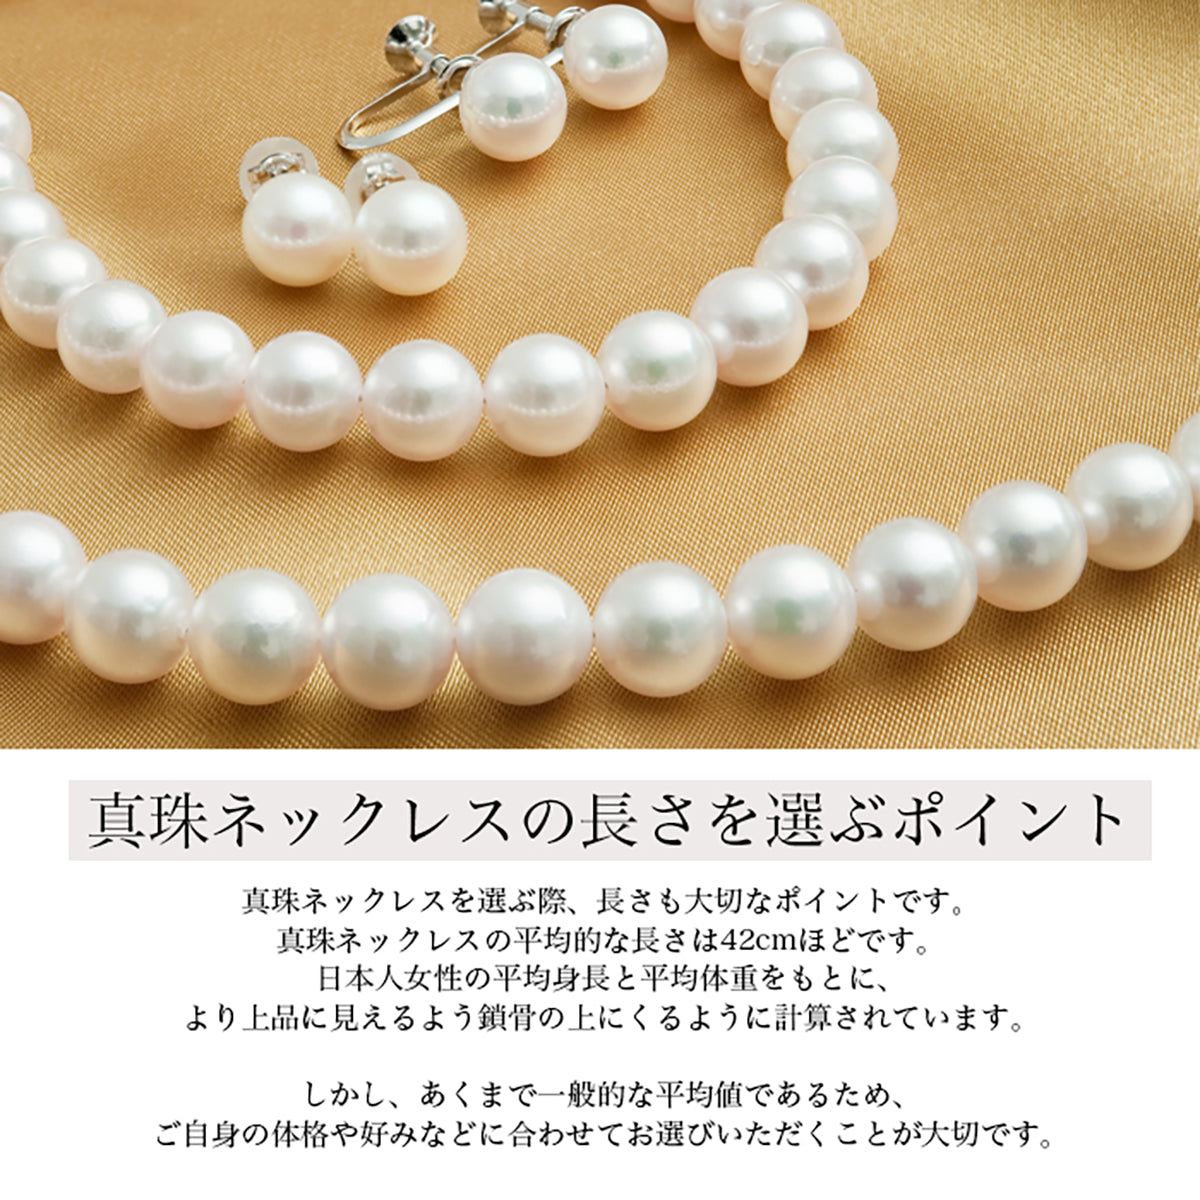 [Gray] Akoya pearl formal necklace 2-piece set [8.0-8.5mm] Earrings/Earrings for ceremonial occasions Certificate of authenticity and storage case included [Limited quantity]